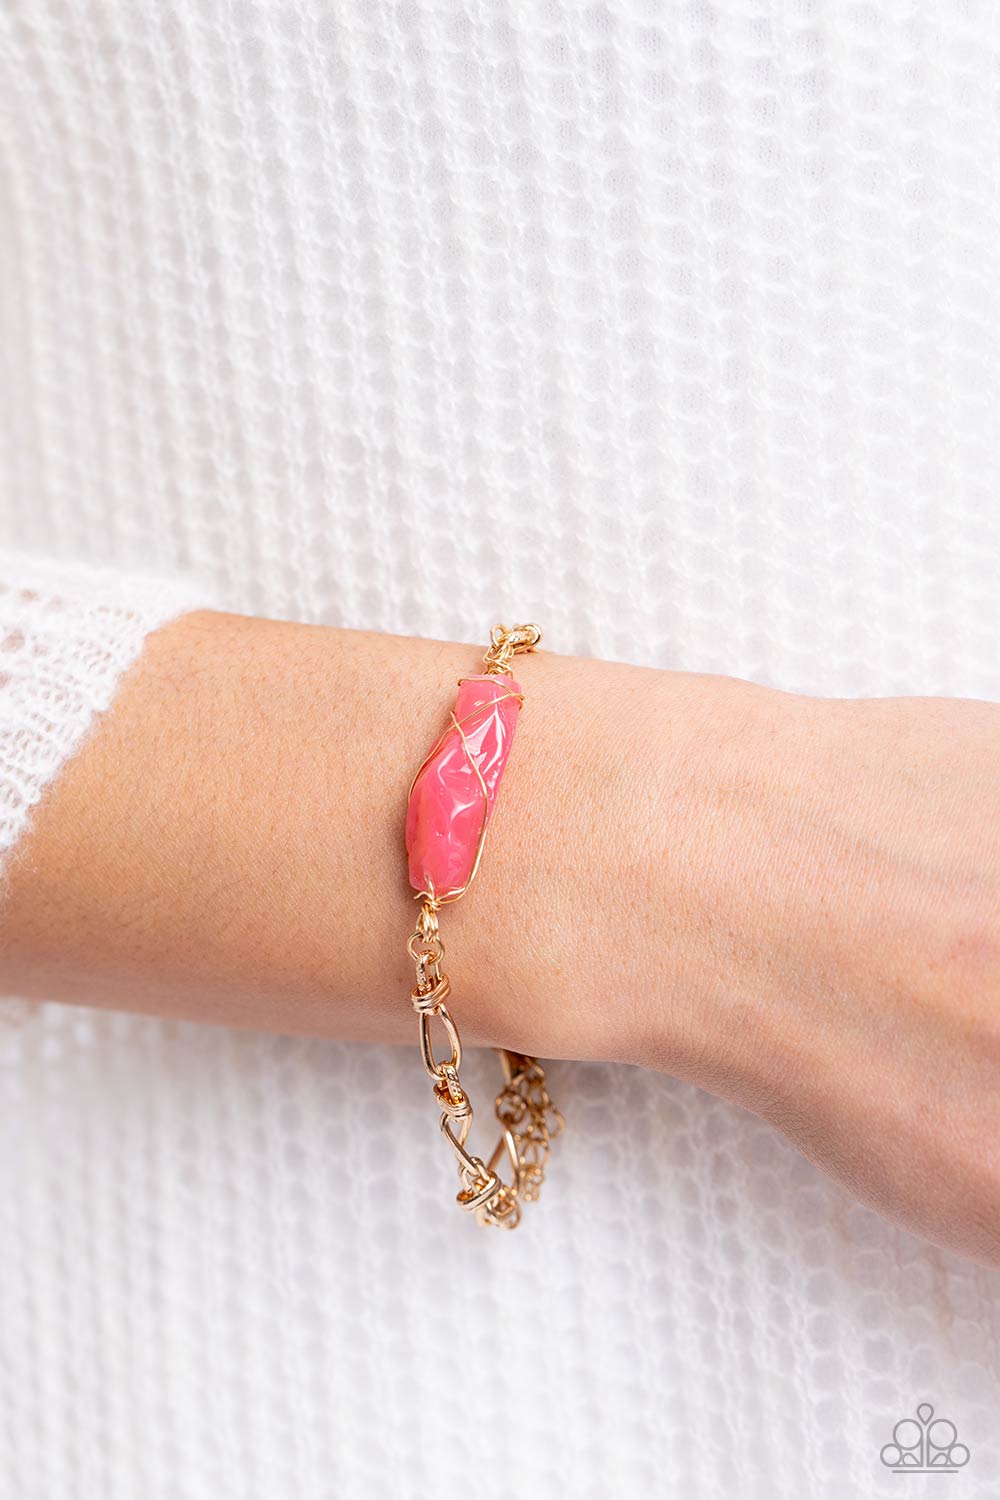 Whimsically Wrapped - Pink Bracelet - Paparazzi Accessories